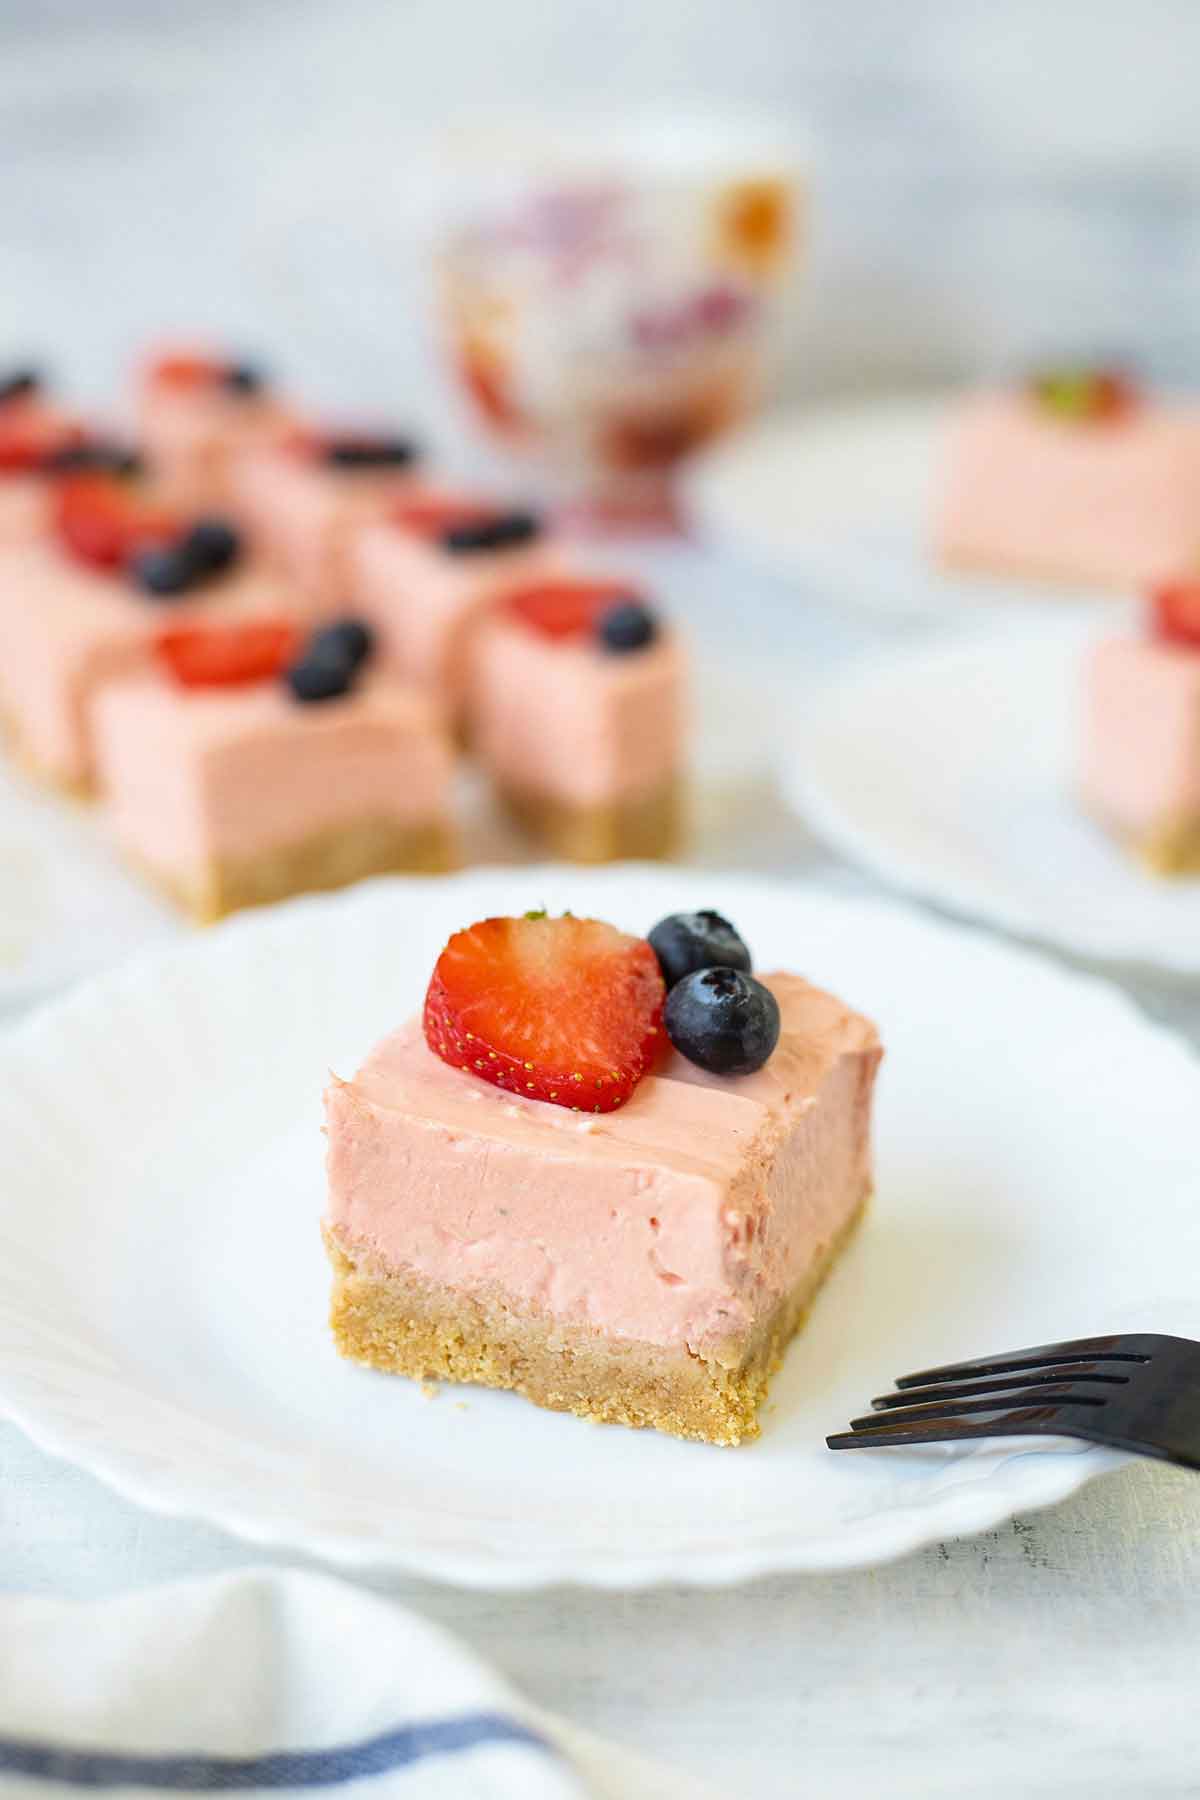 No baked Philadelphia strawberry cheesecake bars topped with berries.